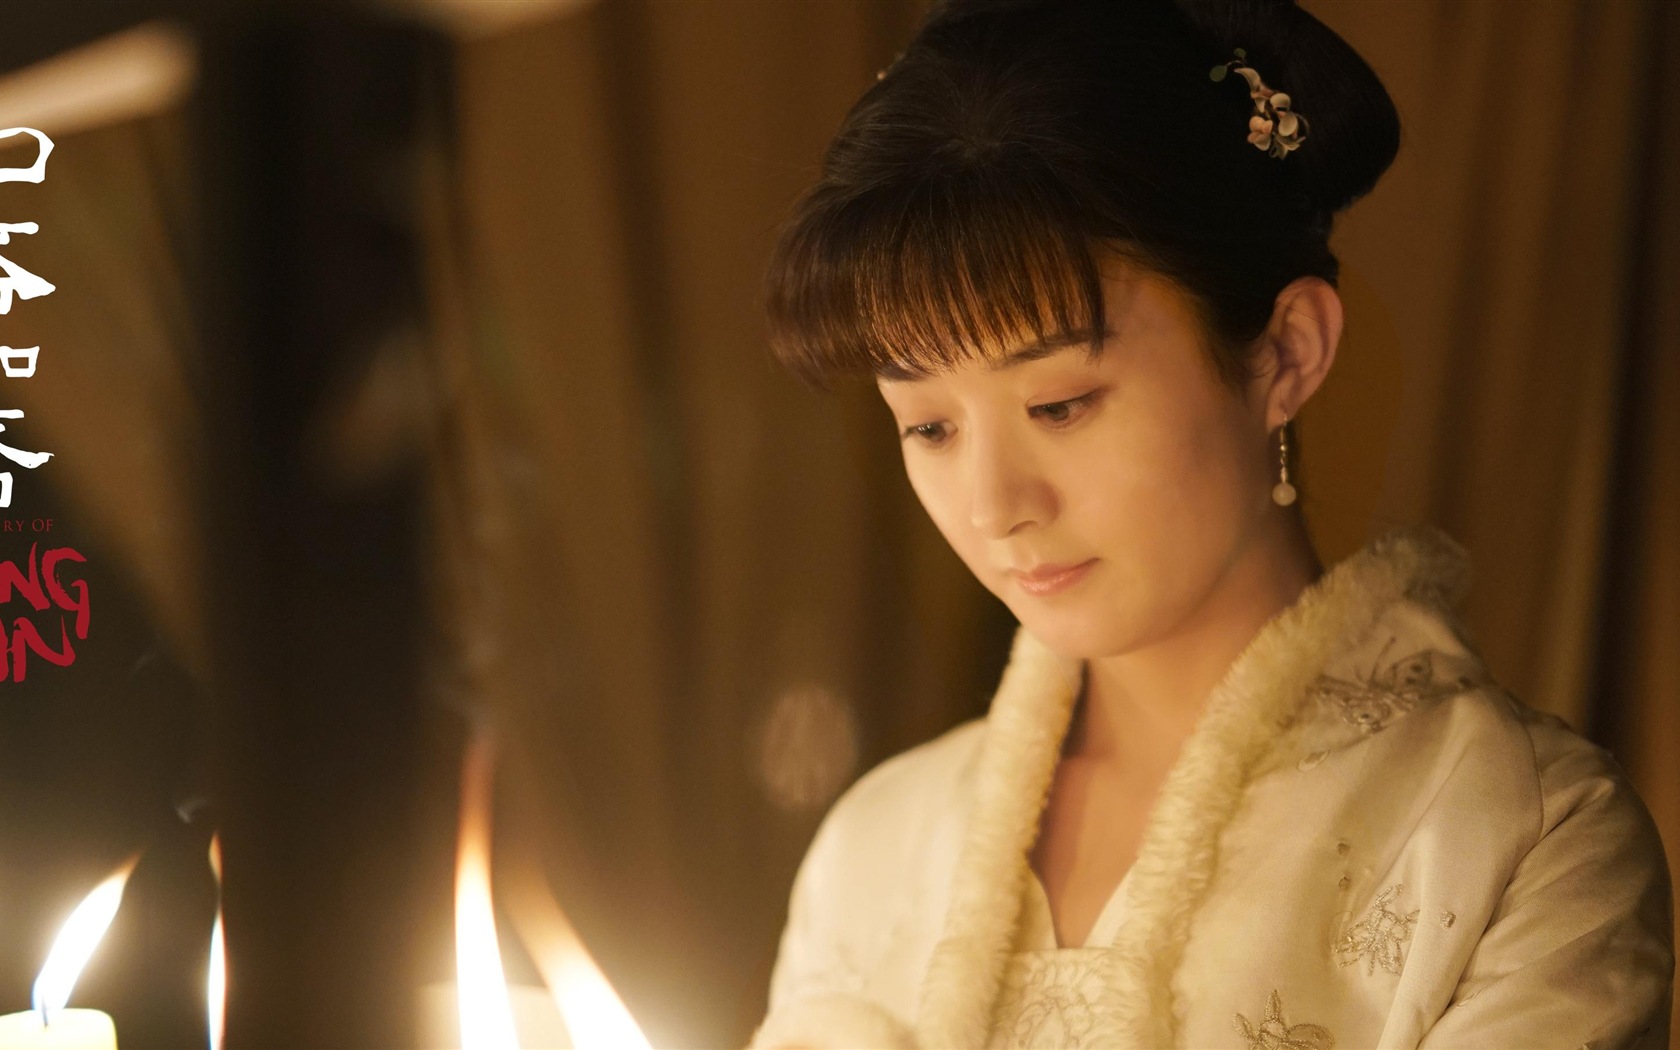 The Story Of MingLan, TV series HD wallpapers #41 - 1680x1050